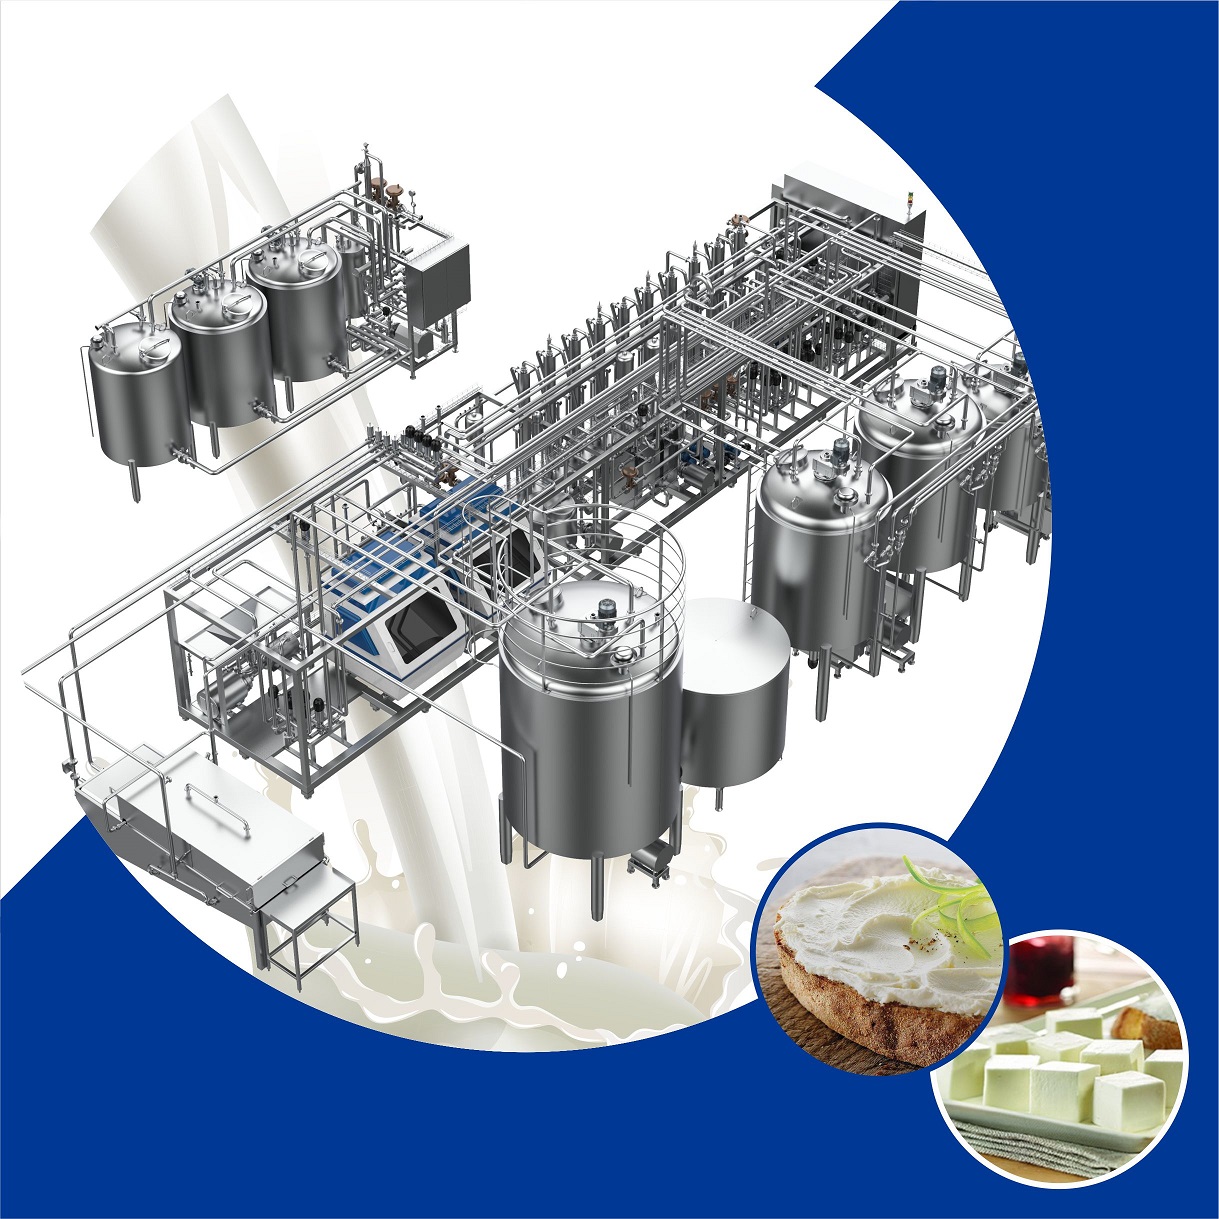 Membrane Filtration and Pasteurization Systems